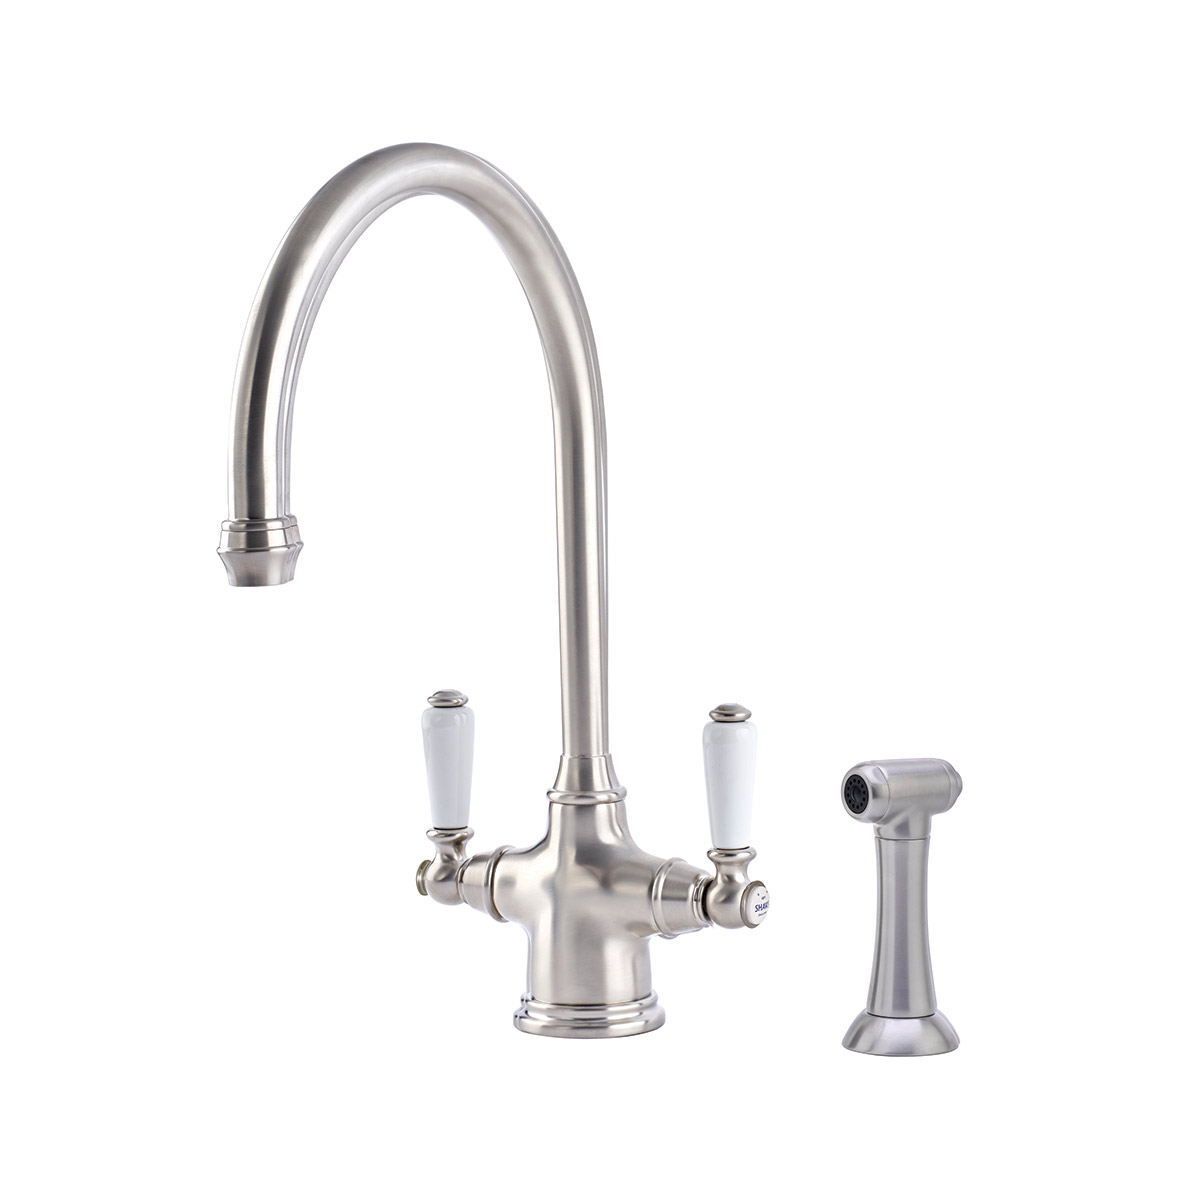 Shaws by Perrin & Rowe Ribble kitchen mixer with spray rinse in pewter. Phoenician style monobloc kitchen tap AUSH.4360. Distributed in Australia by Luxe by Design, Brisbane.